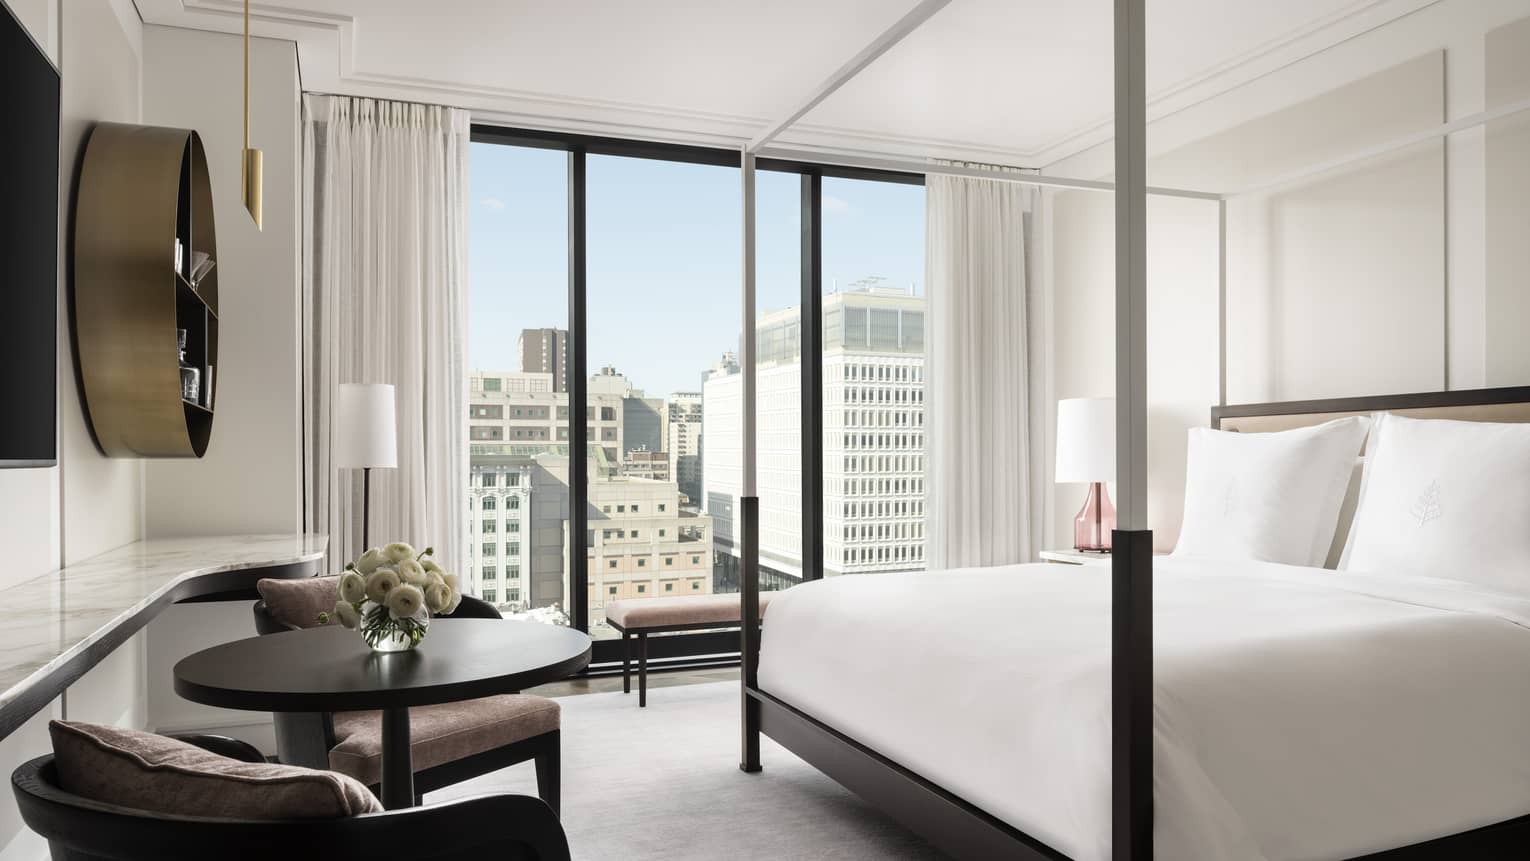 Superior King Room with modern four-poster bed in all-white room with conversation vignette and floor-to-ceiling windows with city views